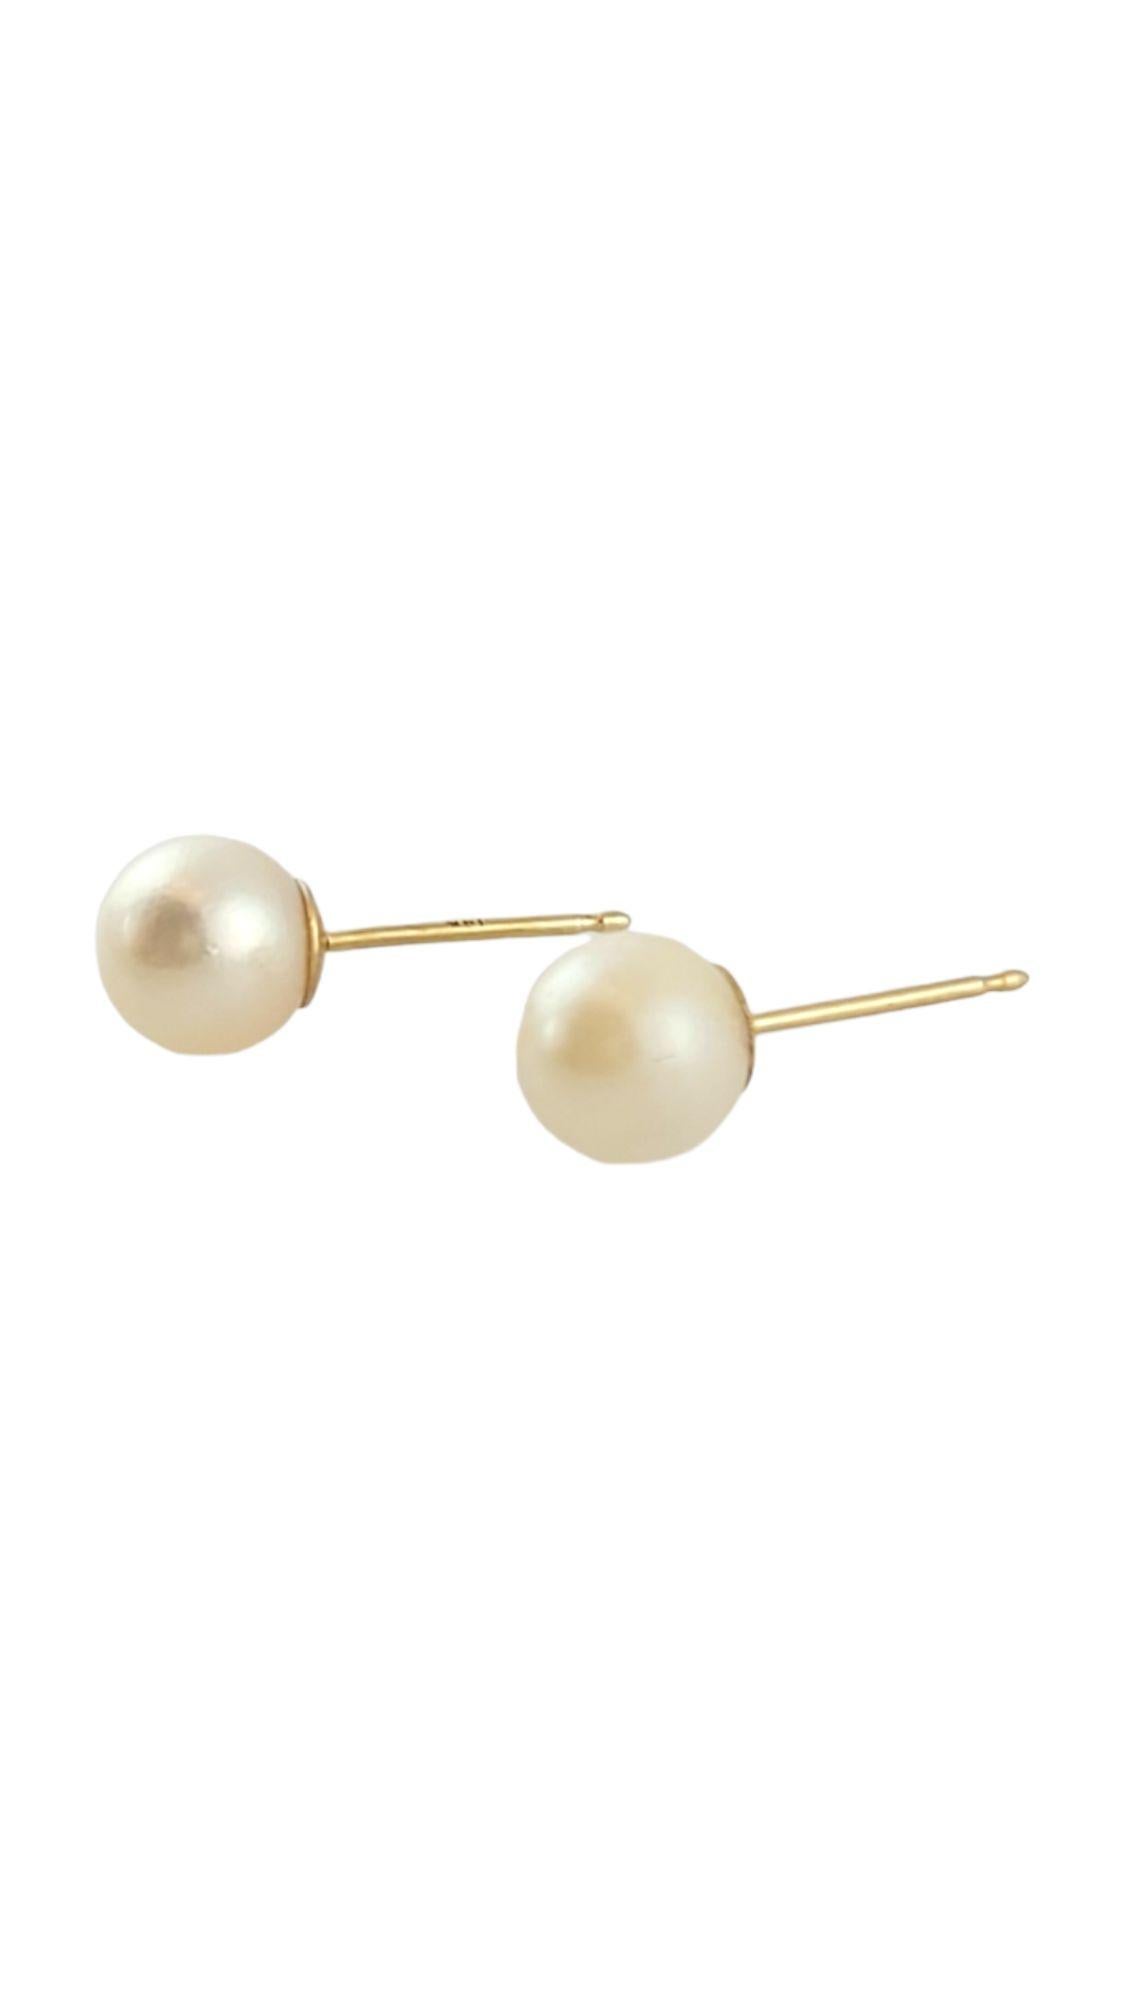 Gorgeous set of pearl stud earrings!

Pearl size: 6.3mm

Weight: 0.84 g/ 0.5 dwt

Hallmark: 14K

Very good condition, professionally polished.

Will come packaged in a gift box or pouch (when possible) and will be shipped U.S. Priority Mail